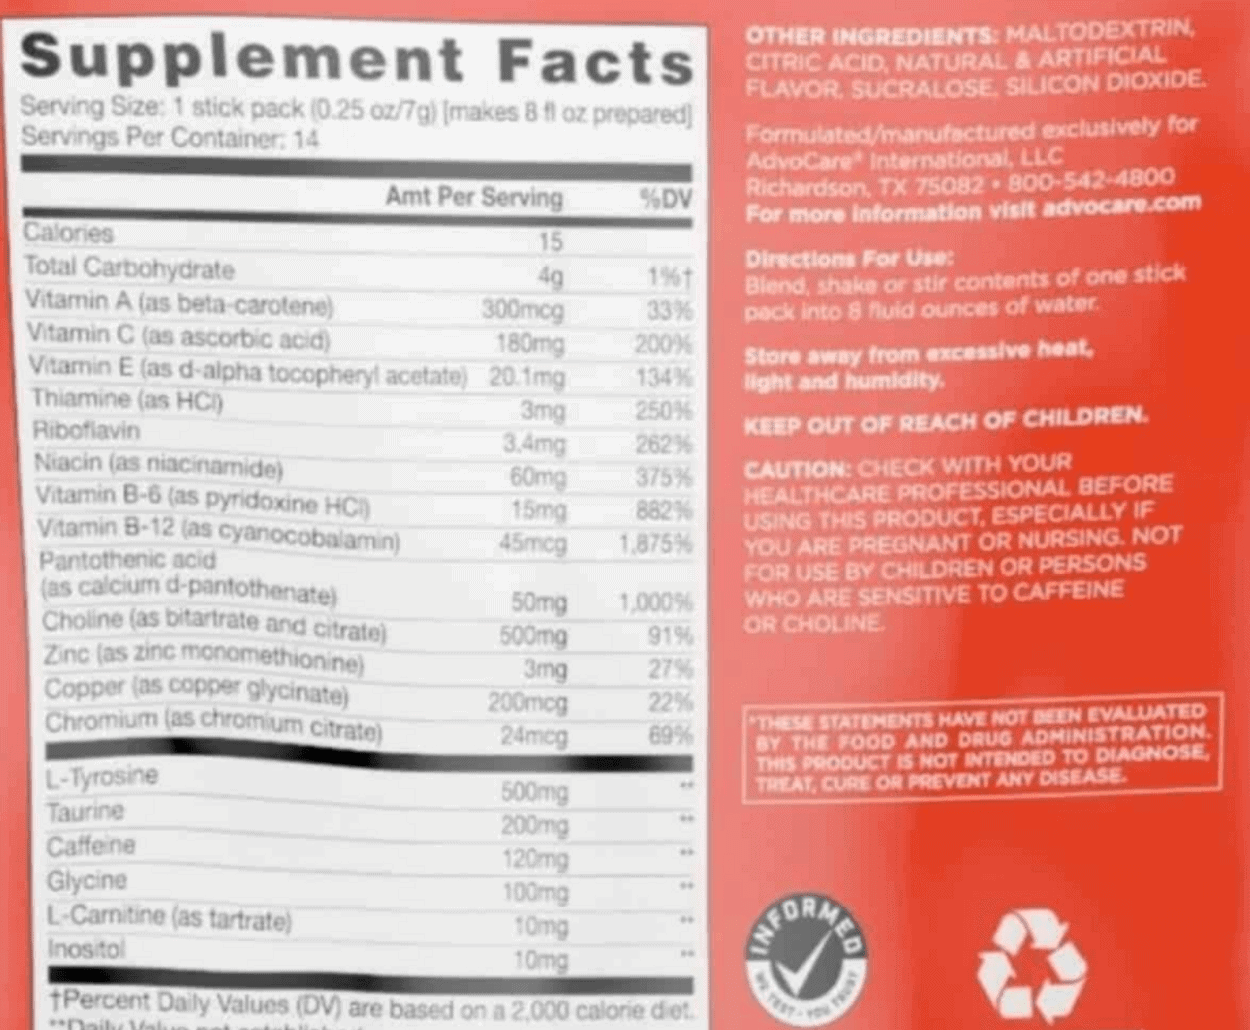 Supplement facts of Advocare Spark.